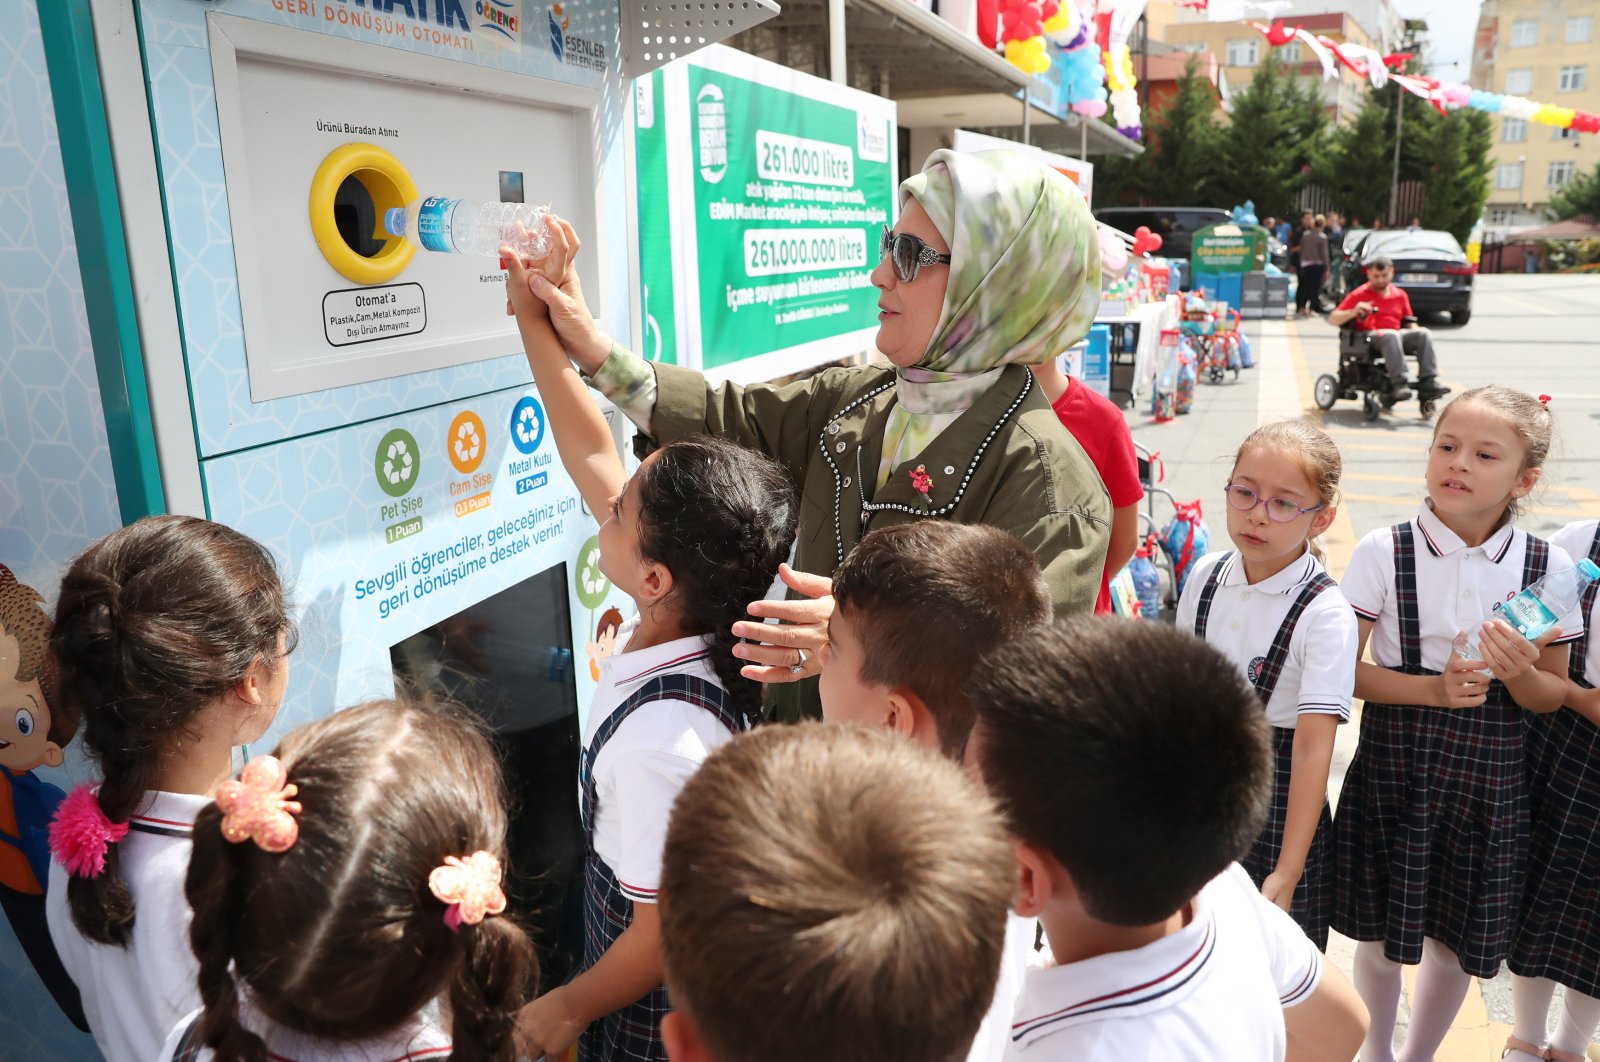 First lady Emine Erdoğan dumps a plastic bottle into a recycling bin at an event to promote the Zero Waste project among students at a school in Istanbul, Turkey, in this undated photo. (AA Photo)